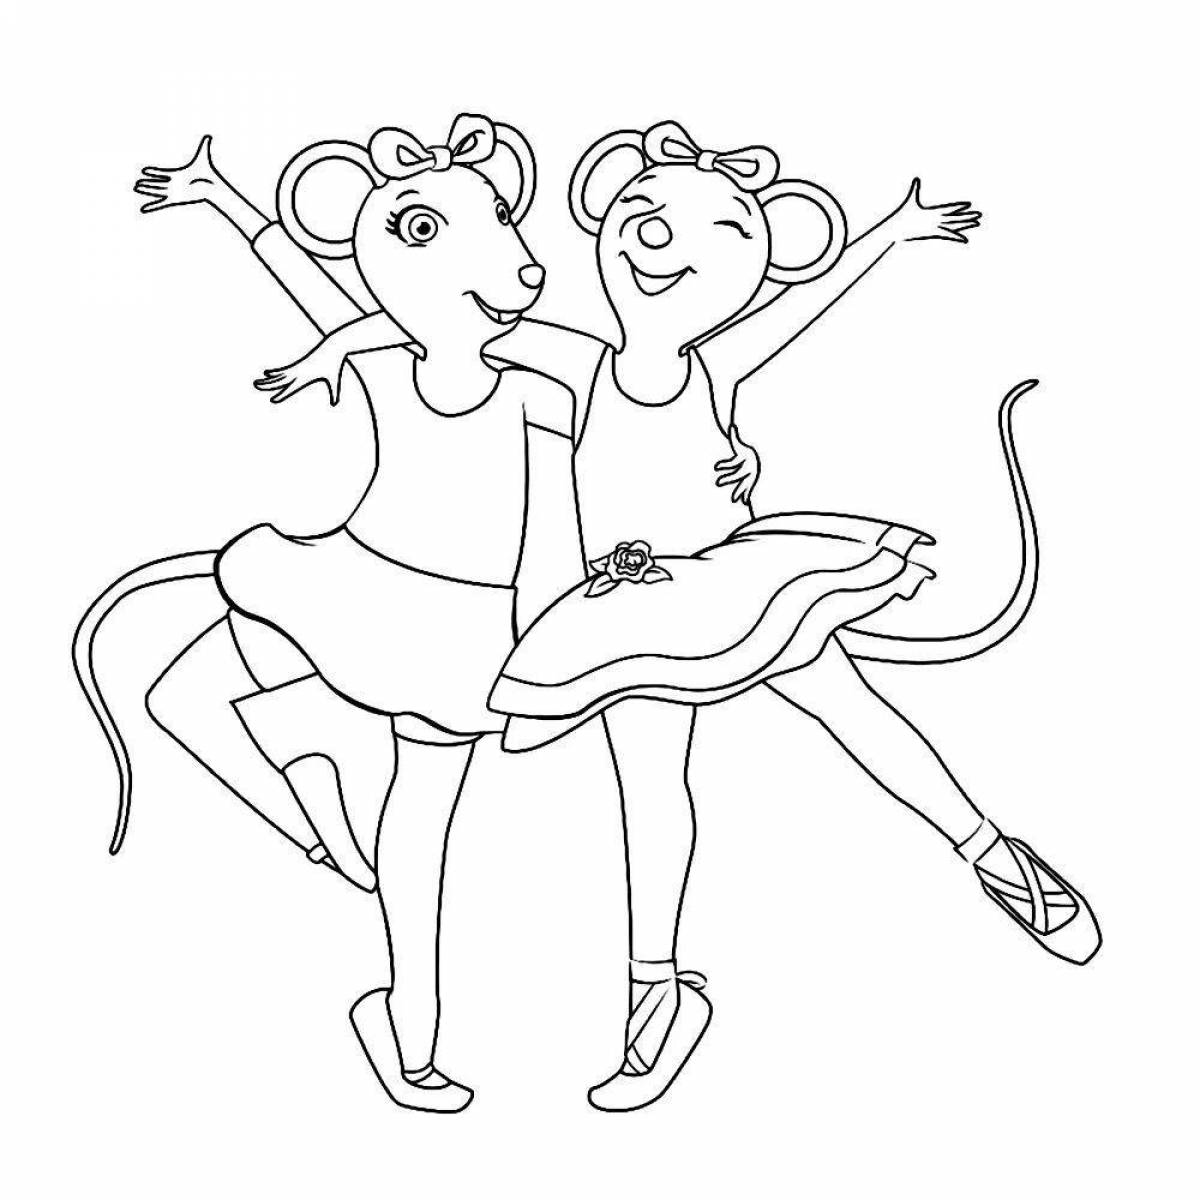 Coloring page playful ballerina bunny